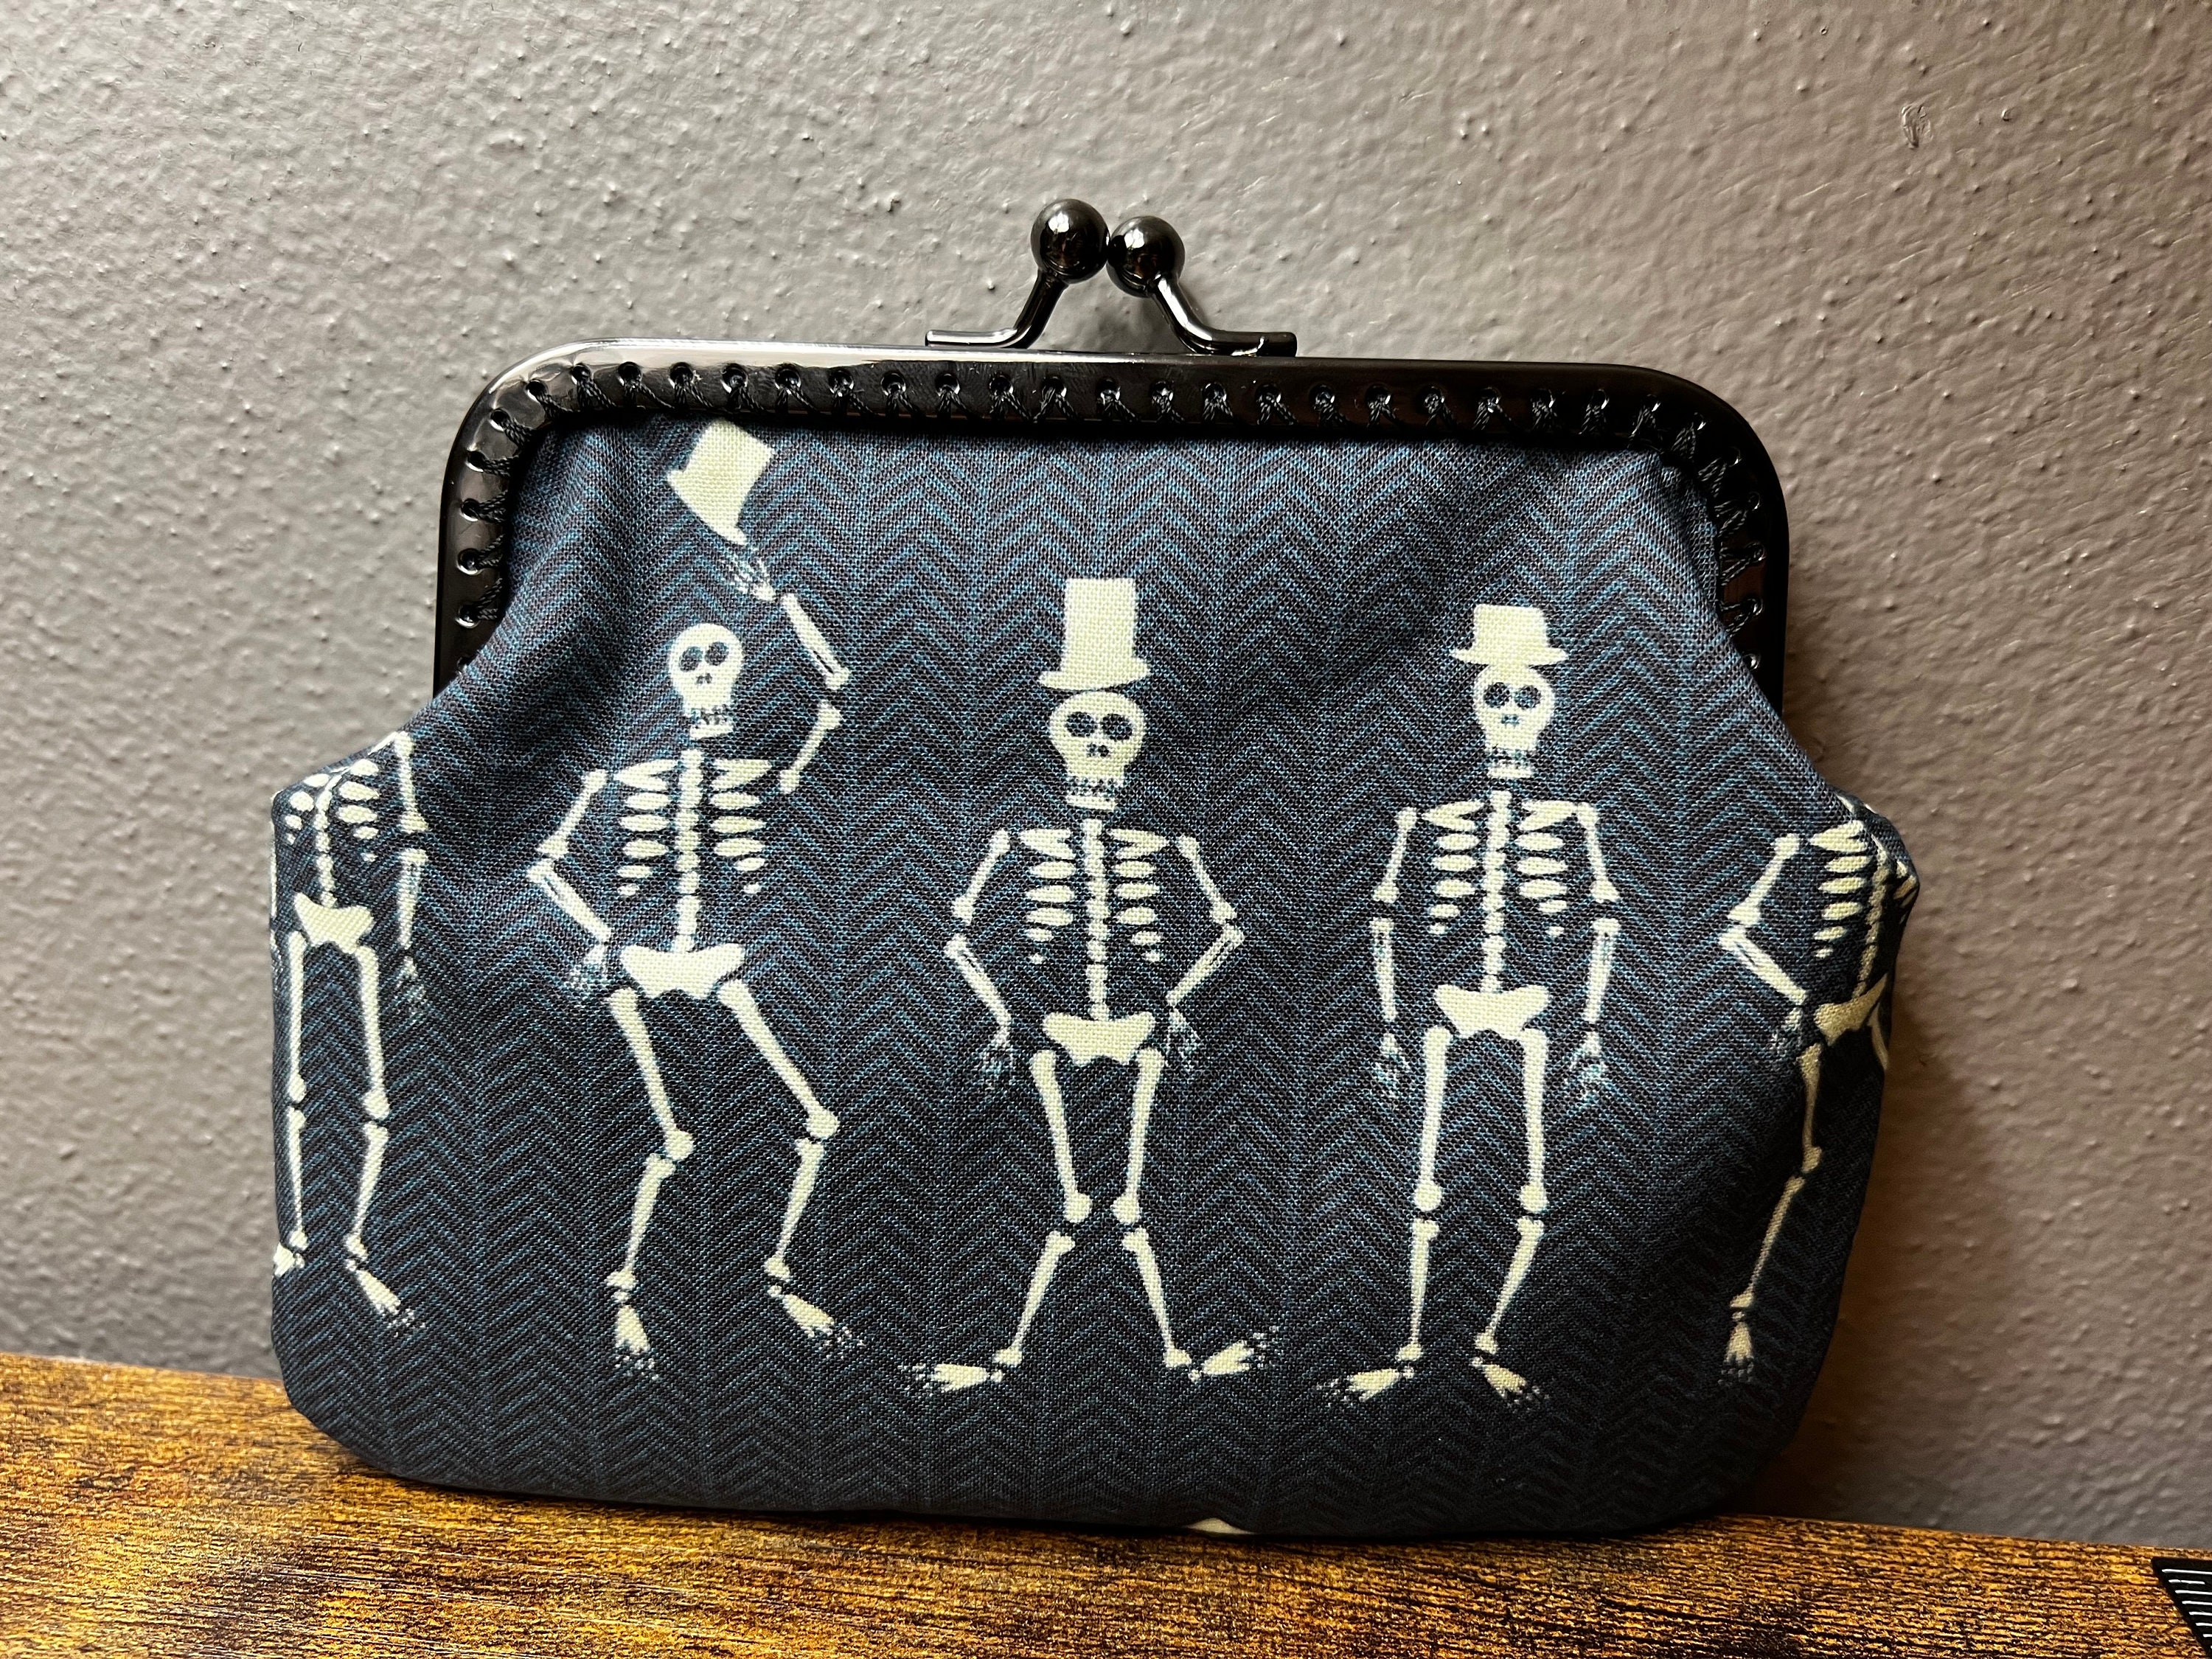 Skull and Crossbones Beaded Mini Clutch Coin Purse - Black and Pewter